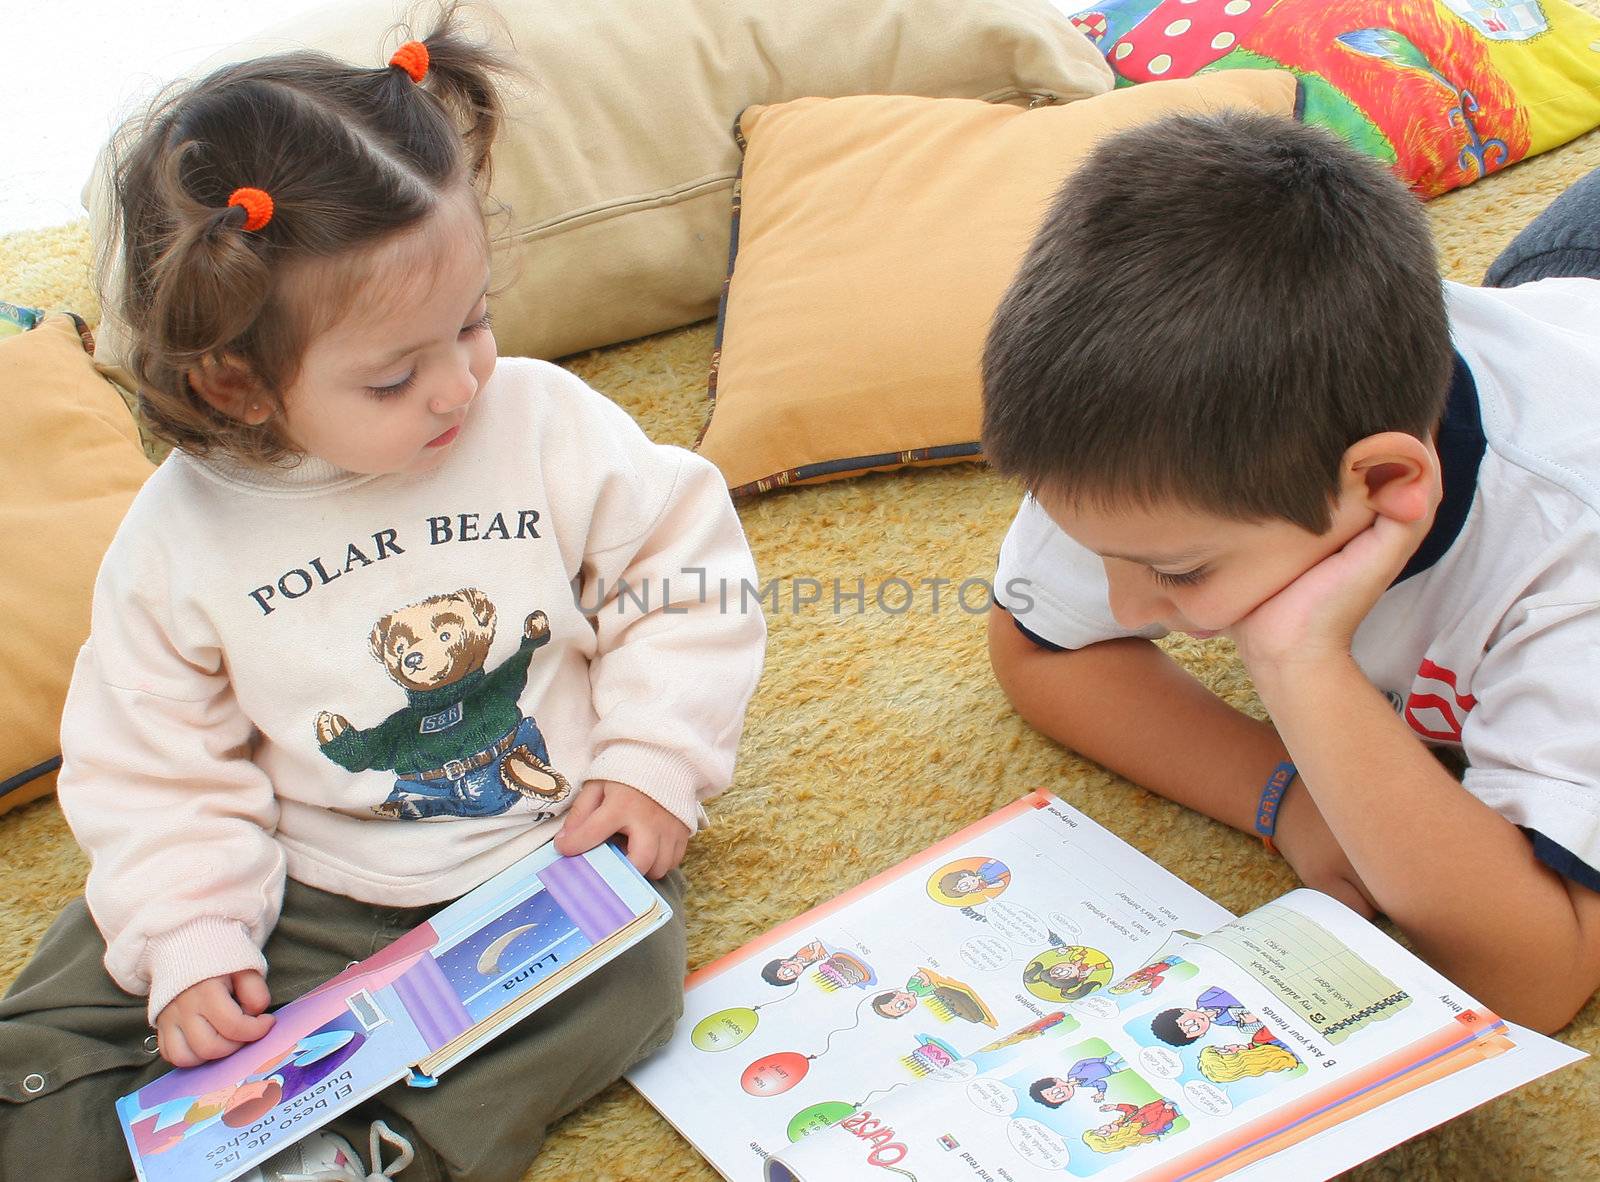 Brother and sister reading books over a carpet. They look interested and concentrated. Visit my gallery for more images of children
